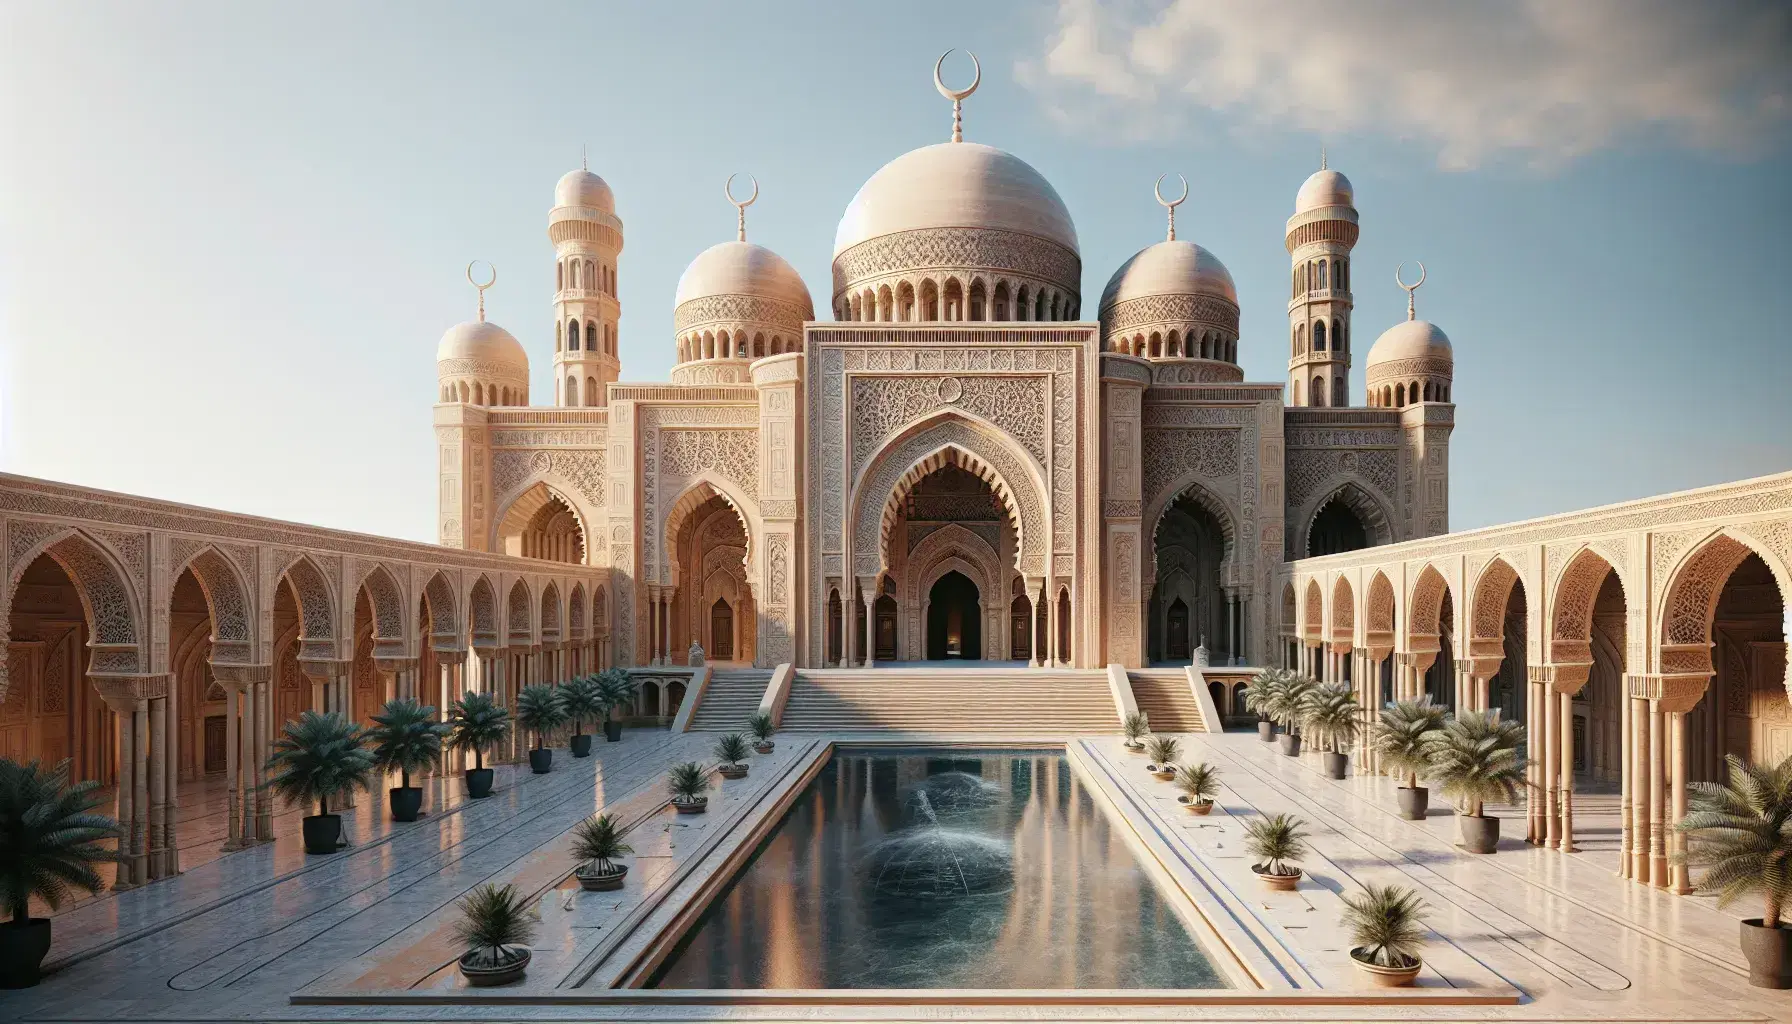 Majestic sandstone mosque with central dome, smaller domes with crescents, ornate arches, and a reflective pool in a sunlit courtyard.